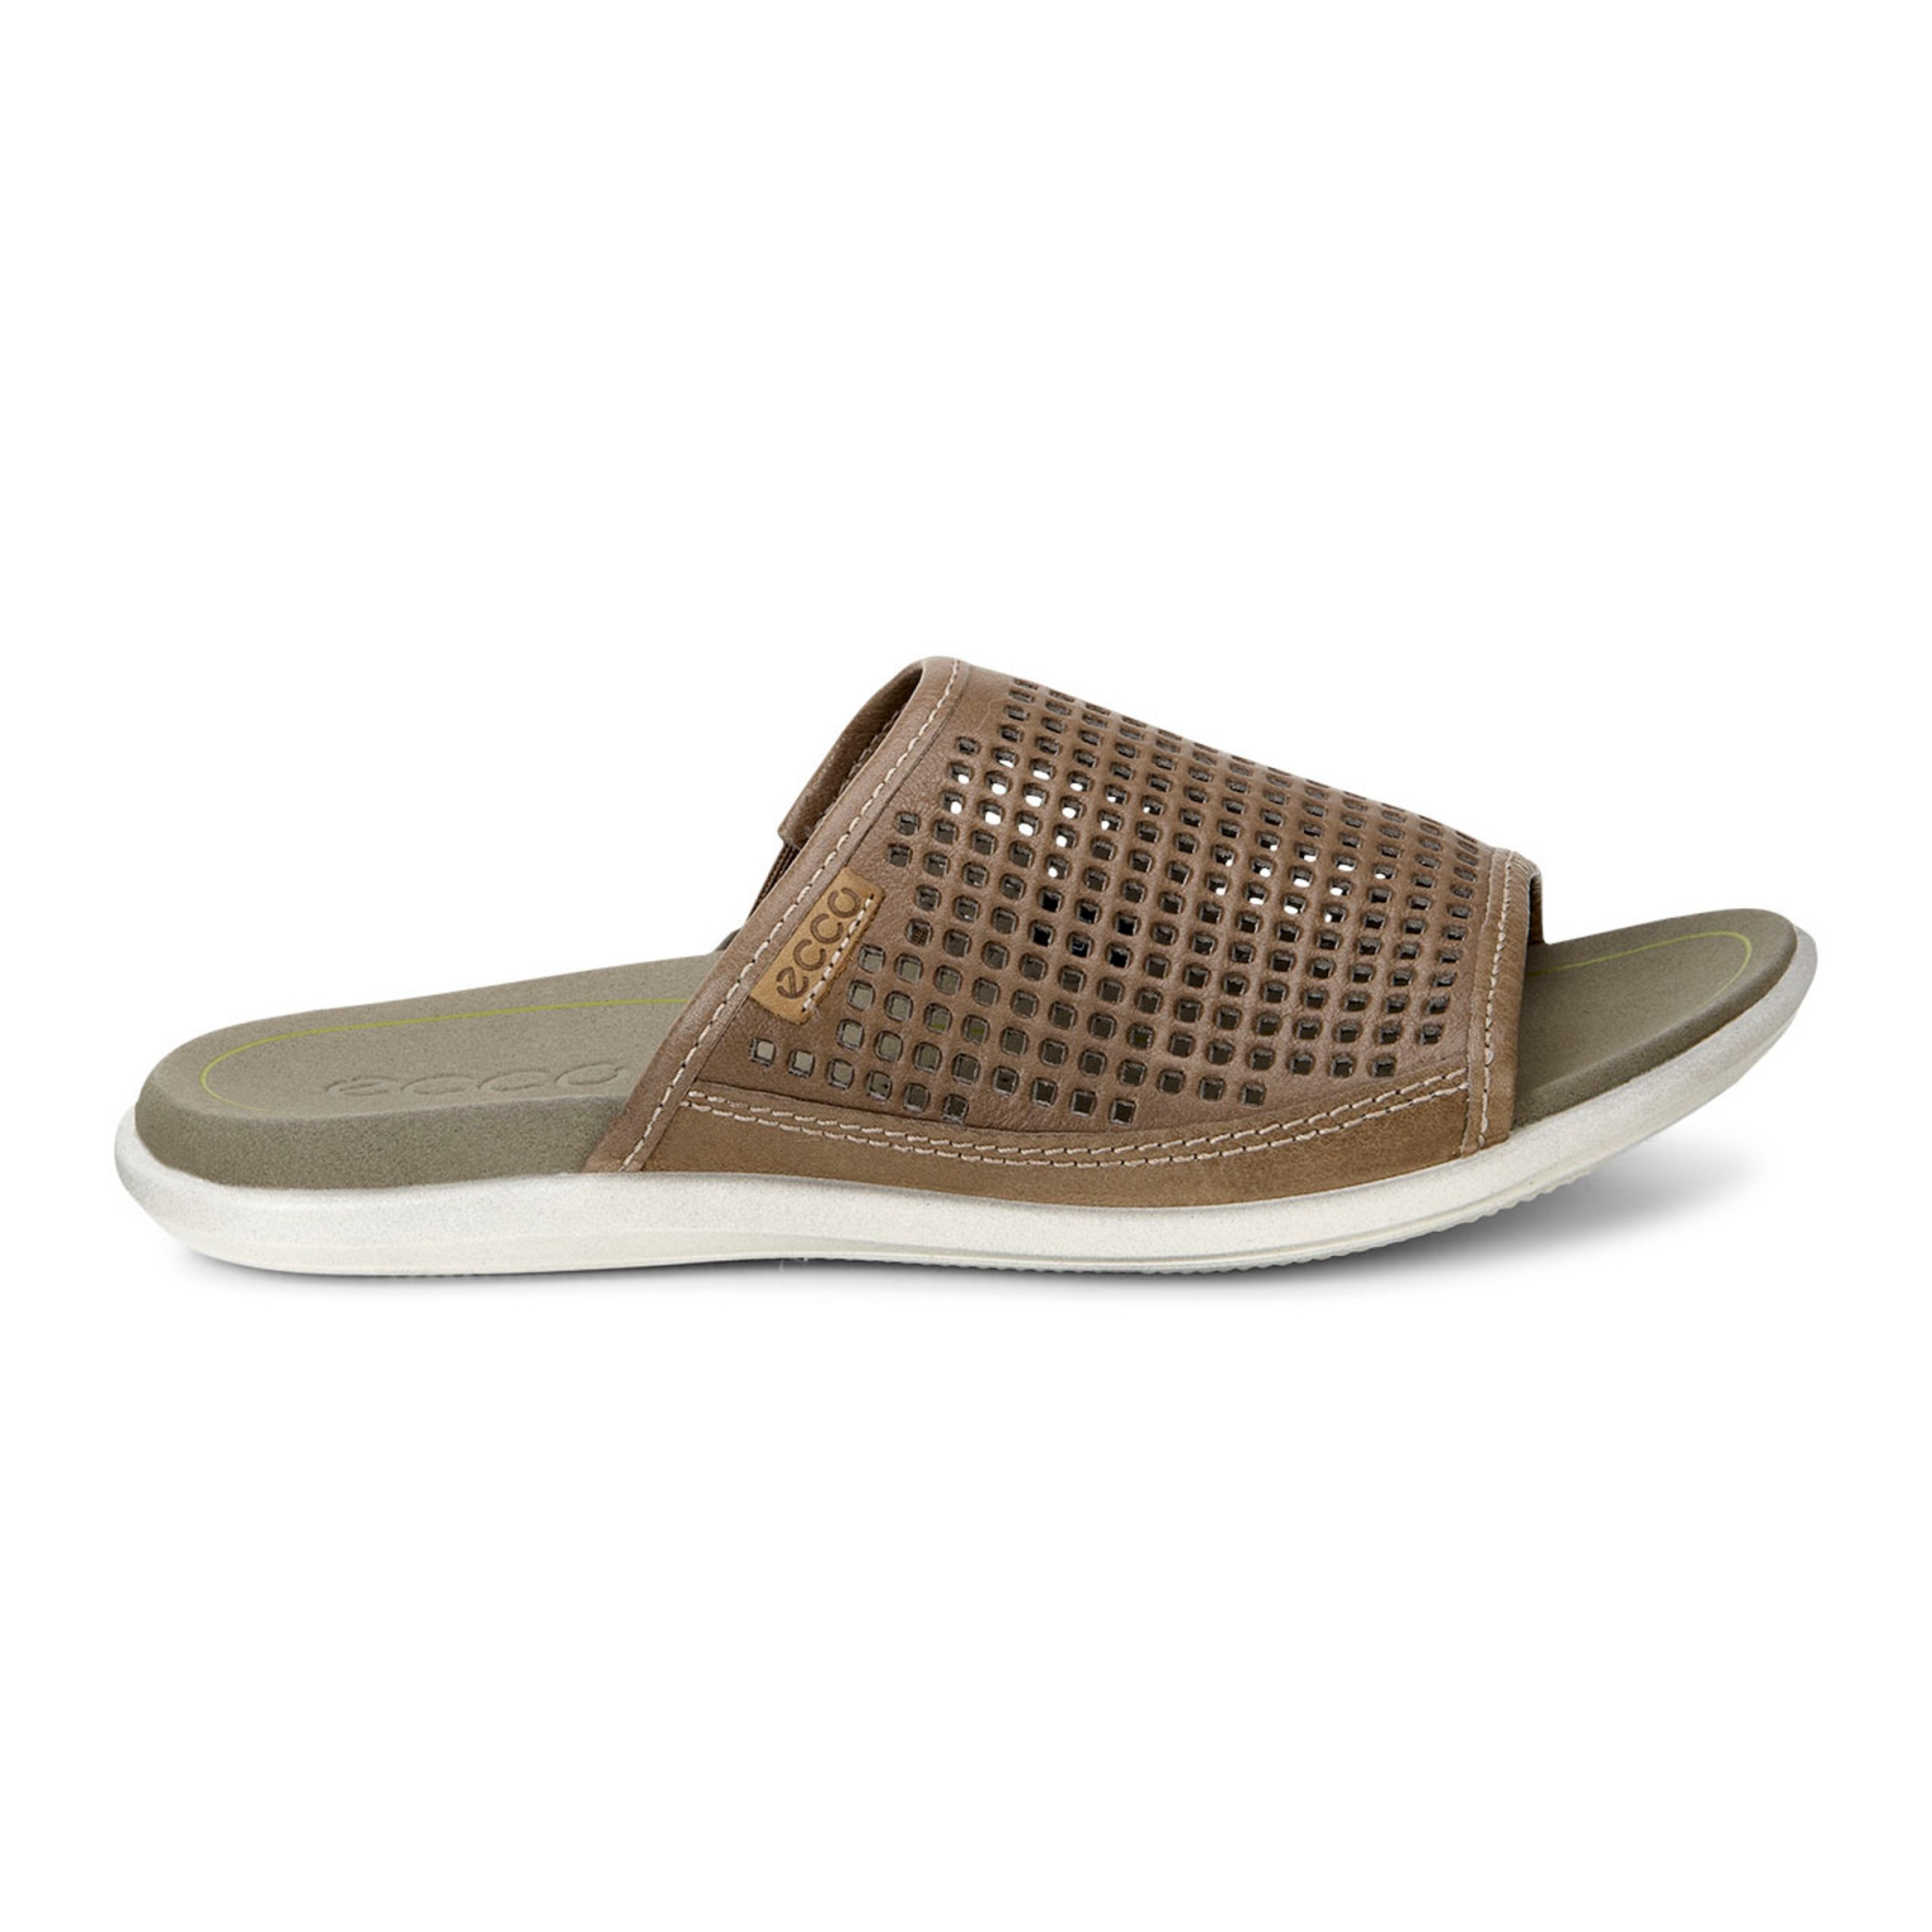 Ecco Sandal - Products - Veryk Mall - Veryk Mall, many product, quick response, your money!